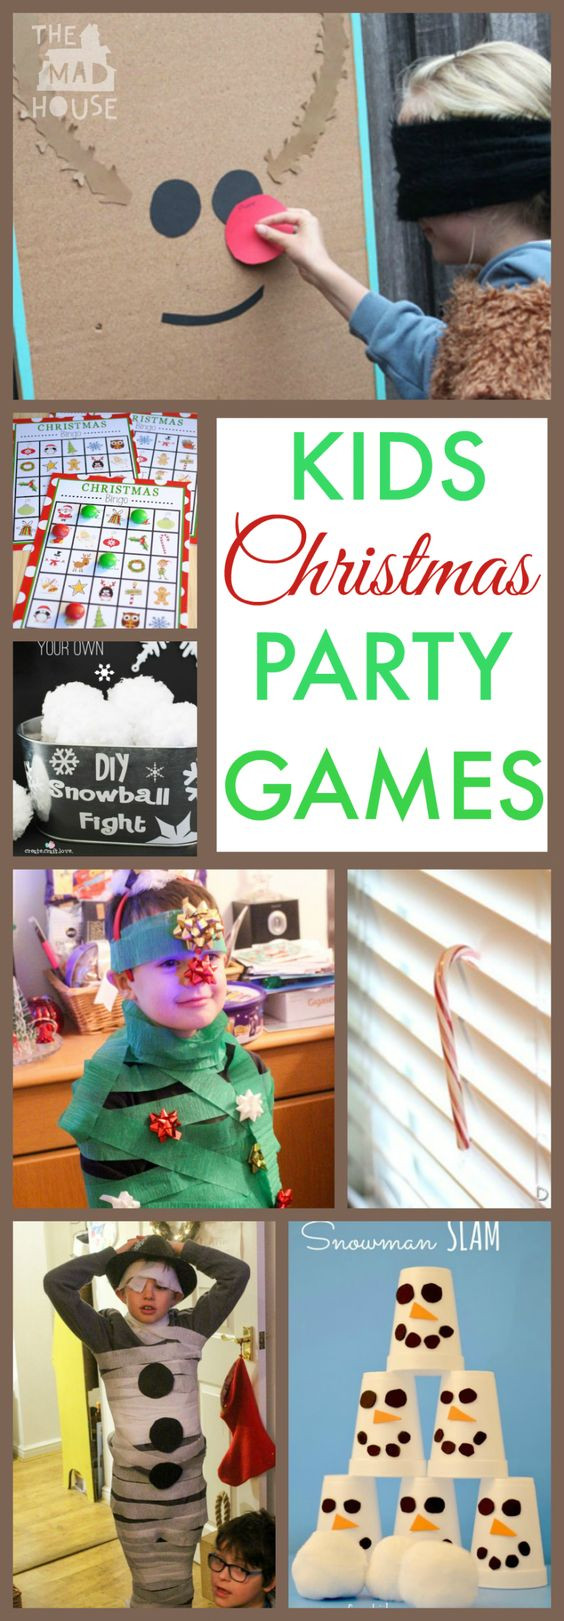 the-best-ideas-for-christmas-party-games-ideas-for-large-groups-home